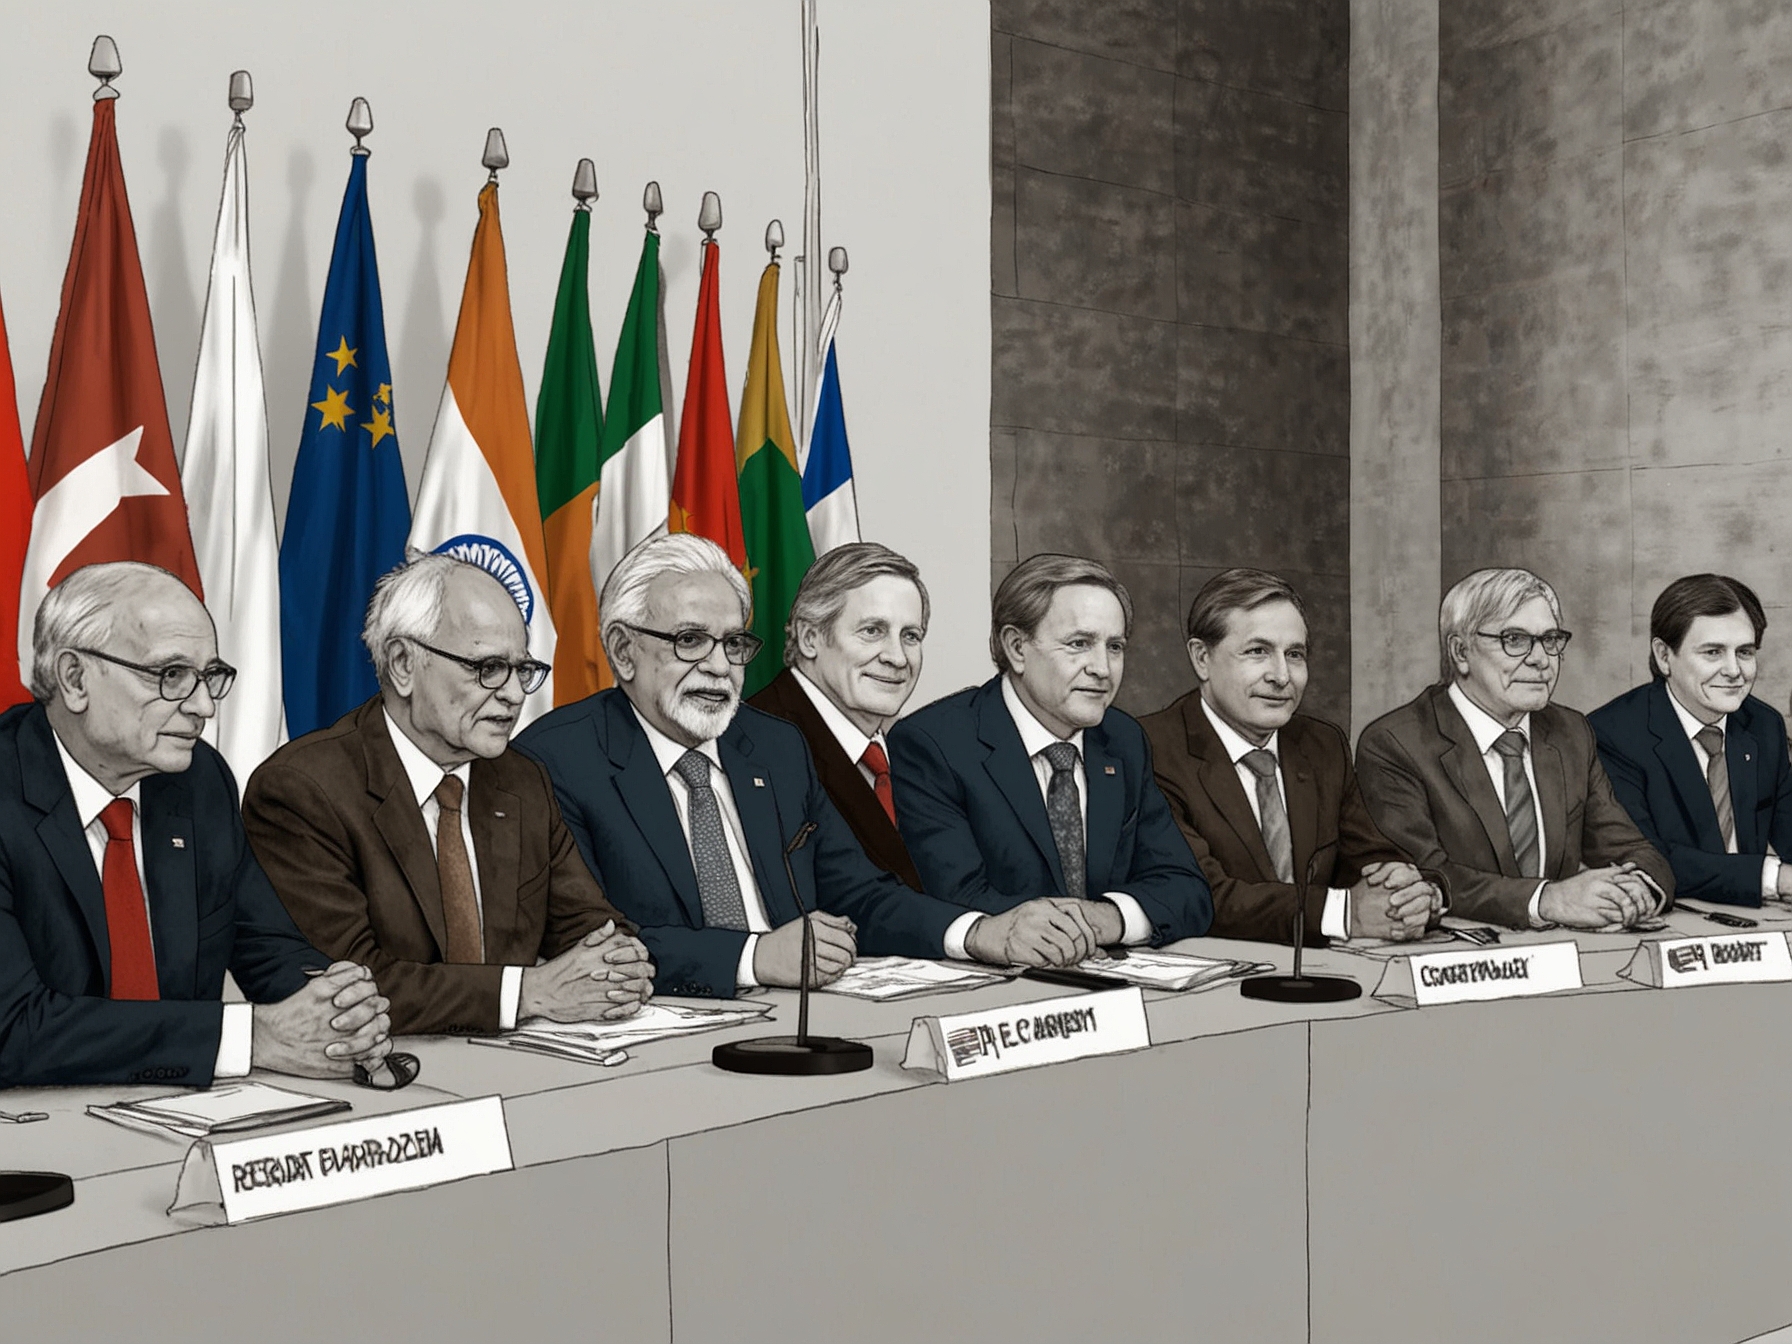 G7 leaders, including India's representative, engaged in a discussion on sustainable development and global economic collaboration at the summit in Italy.